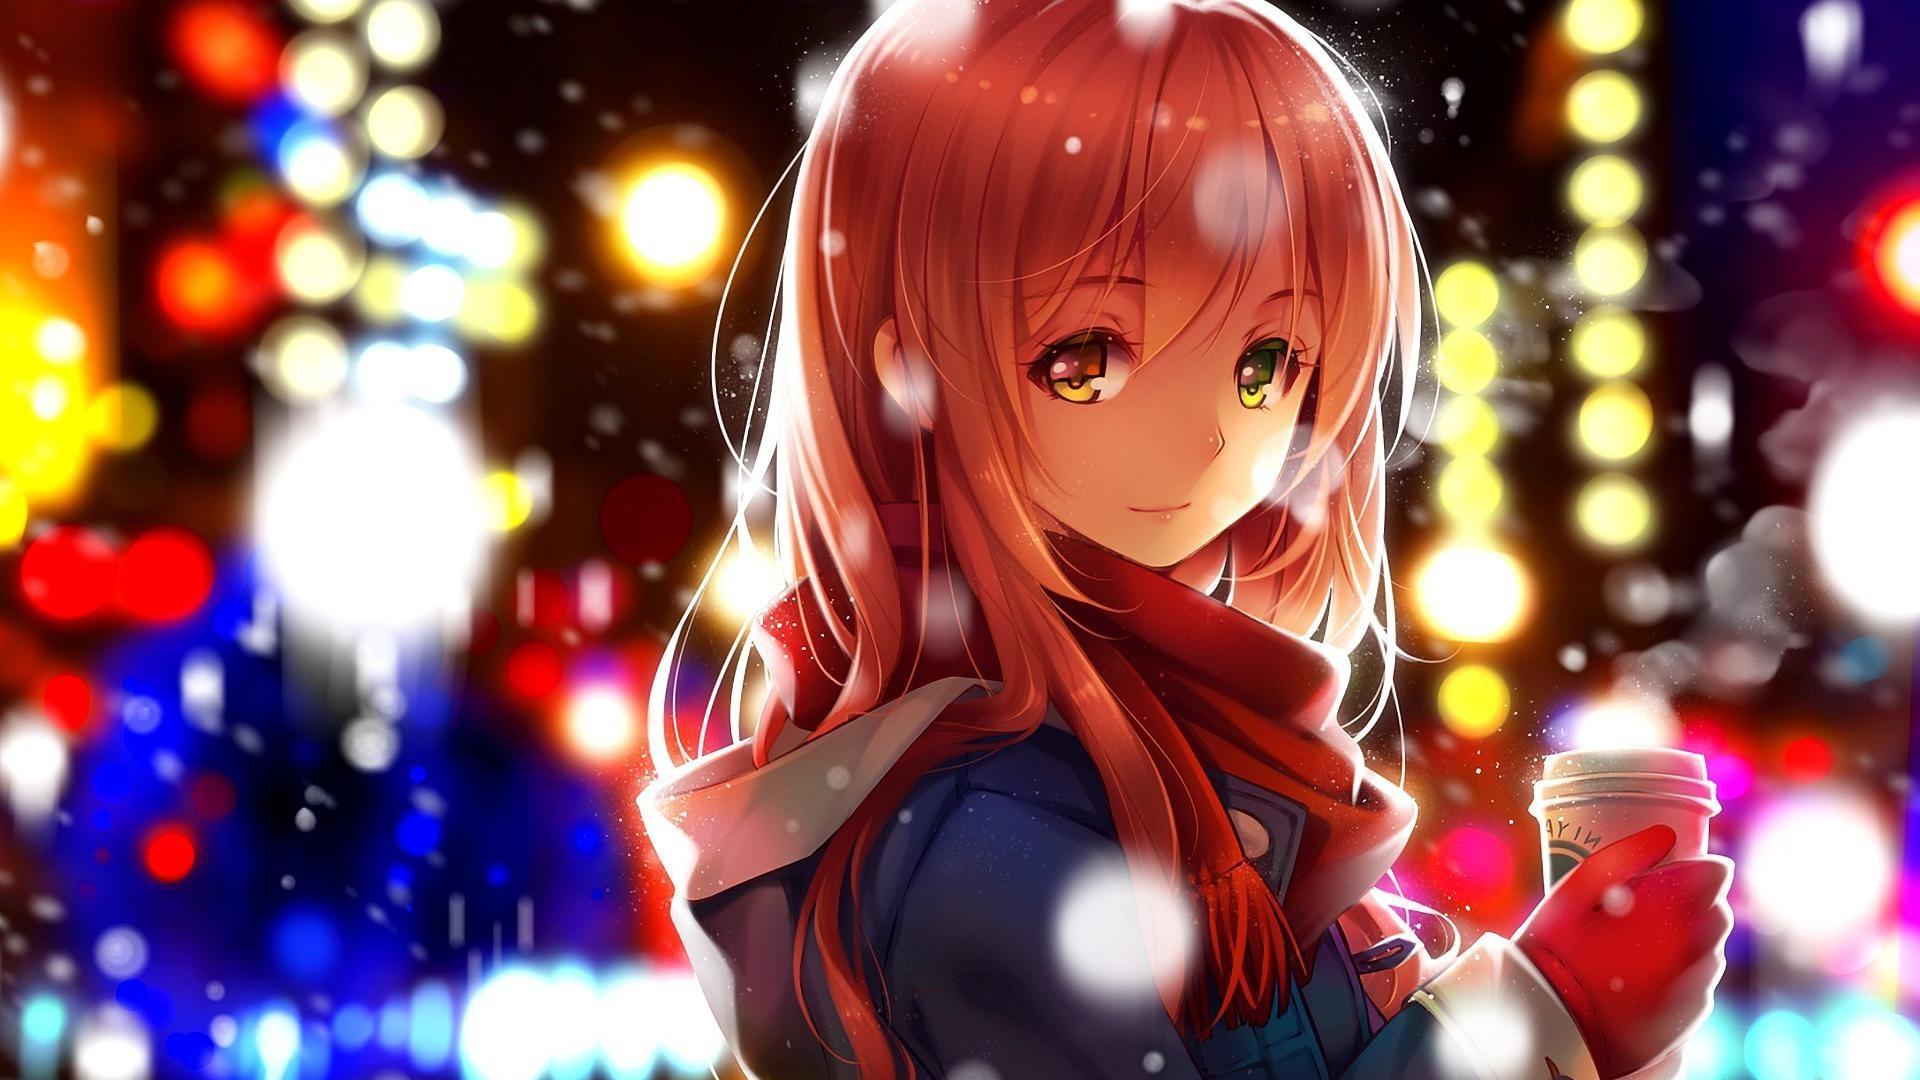 Anime Girl Icon Wallpapers - Wallpaper Cave